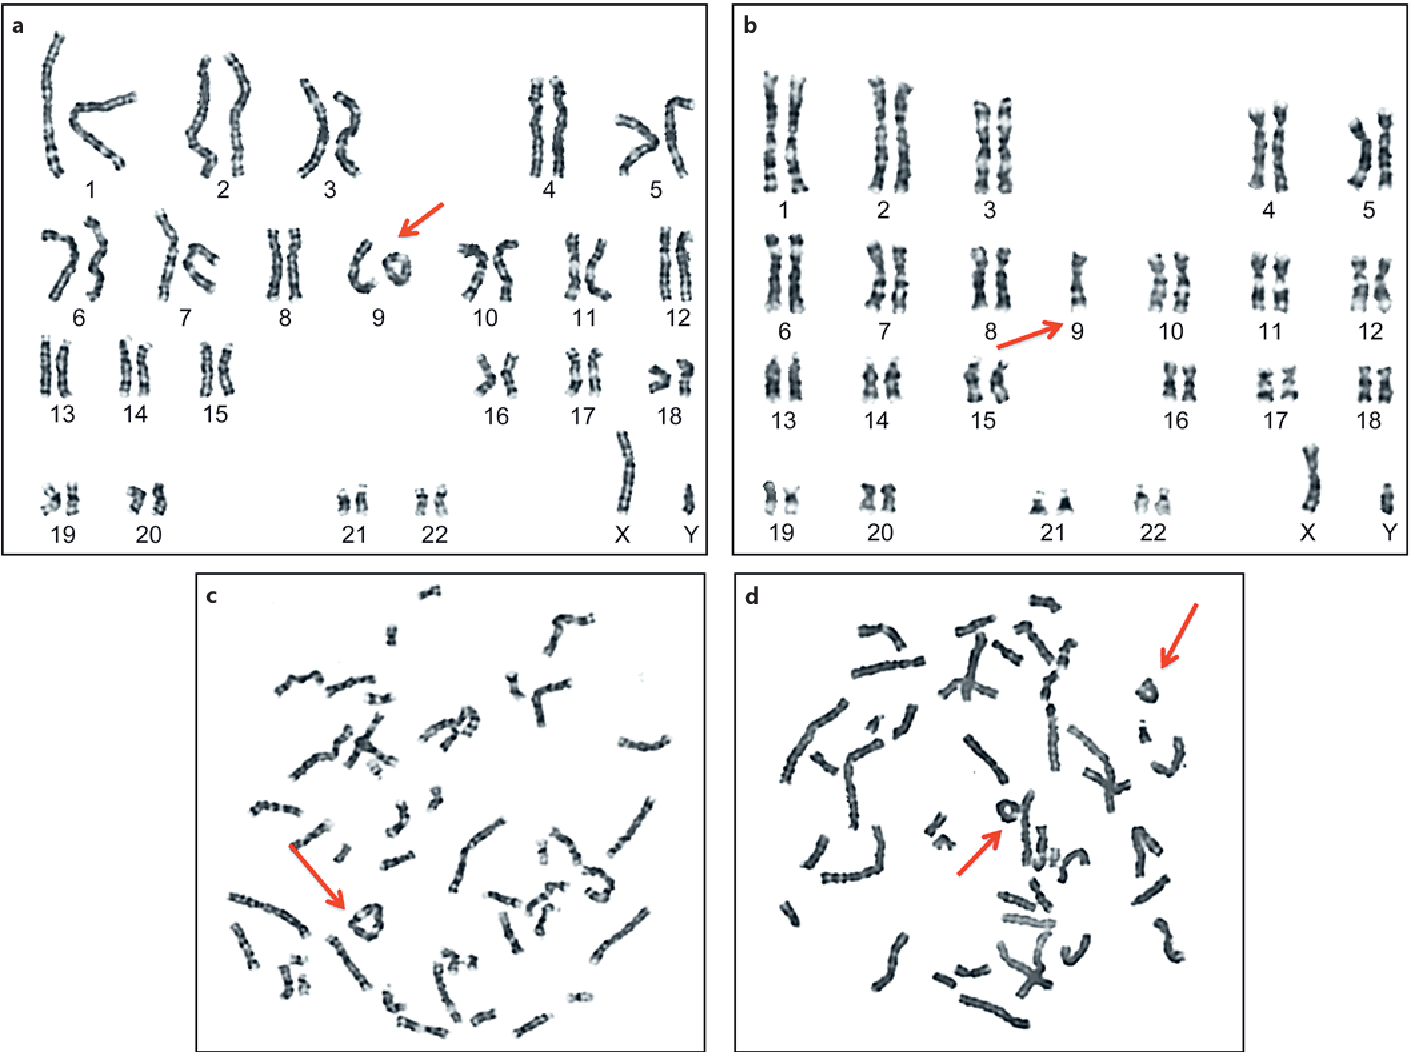 PLNT 3140 Introductory Cytogenetics - Changes in Chromosome Structure I